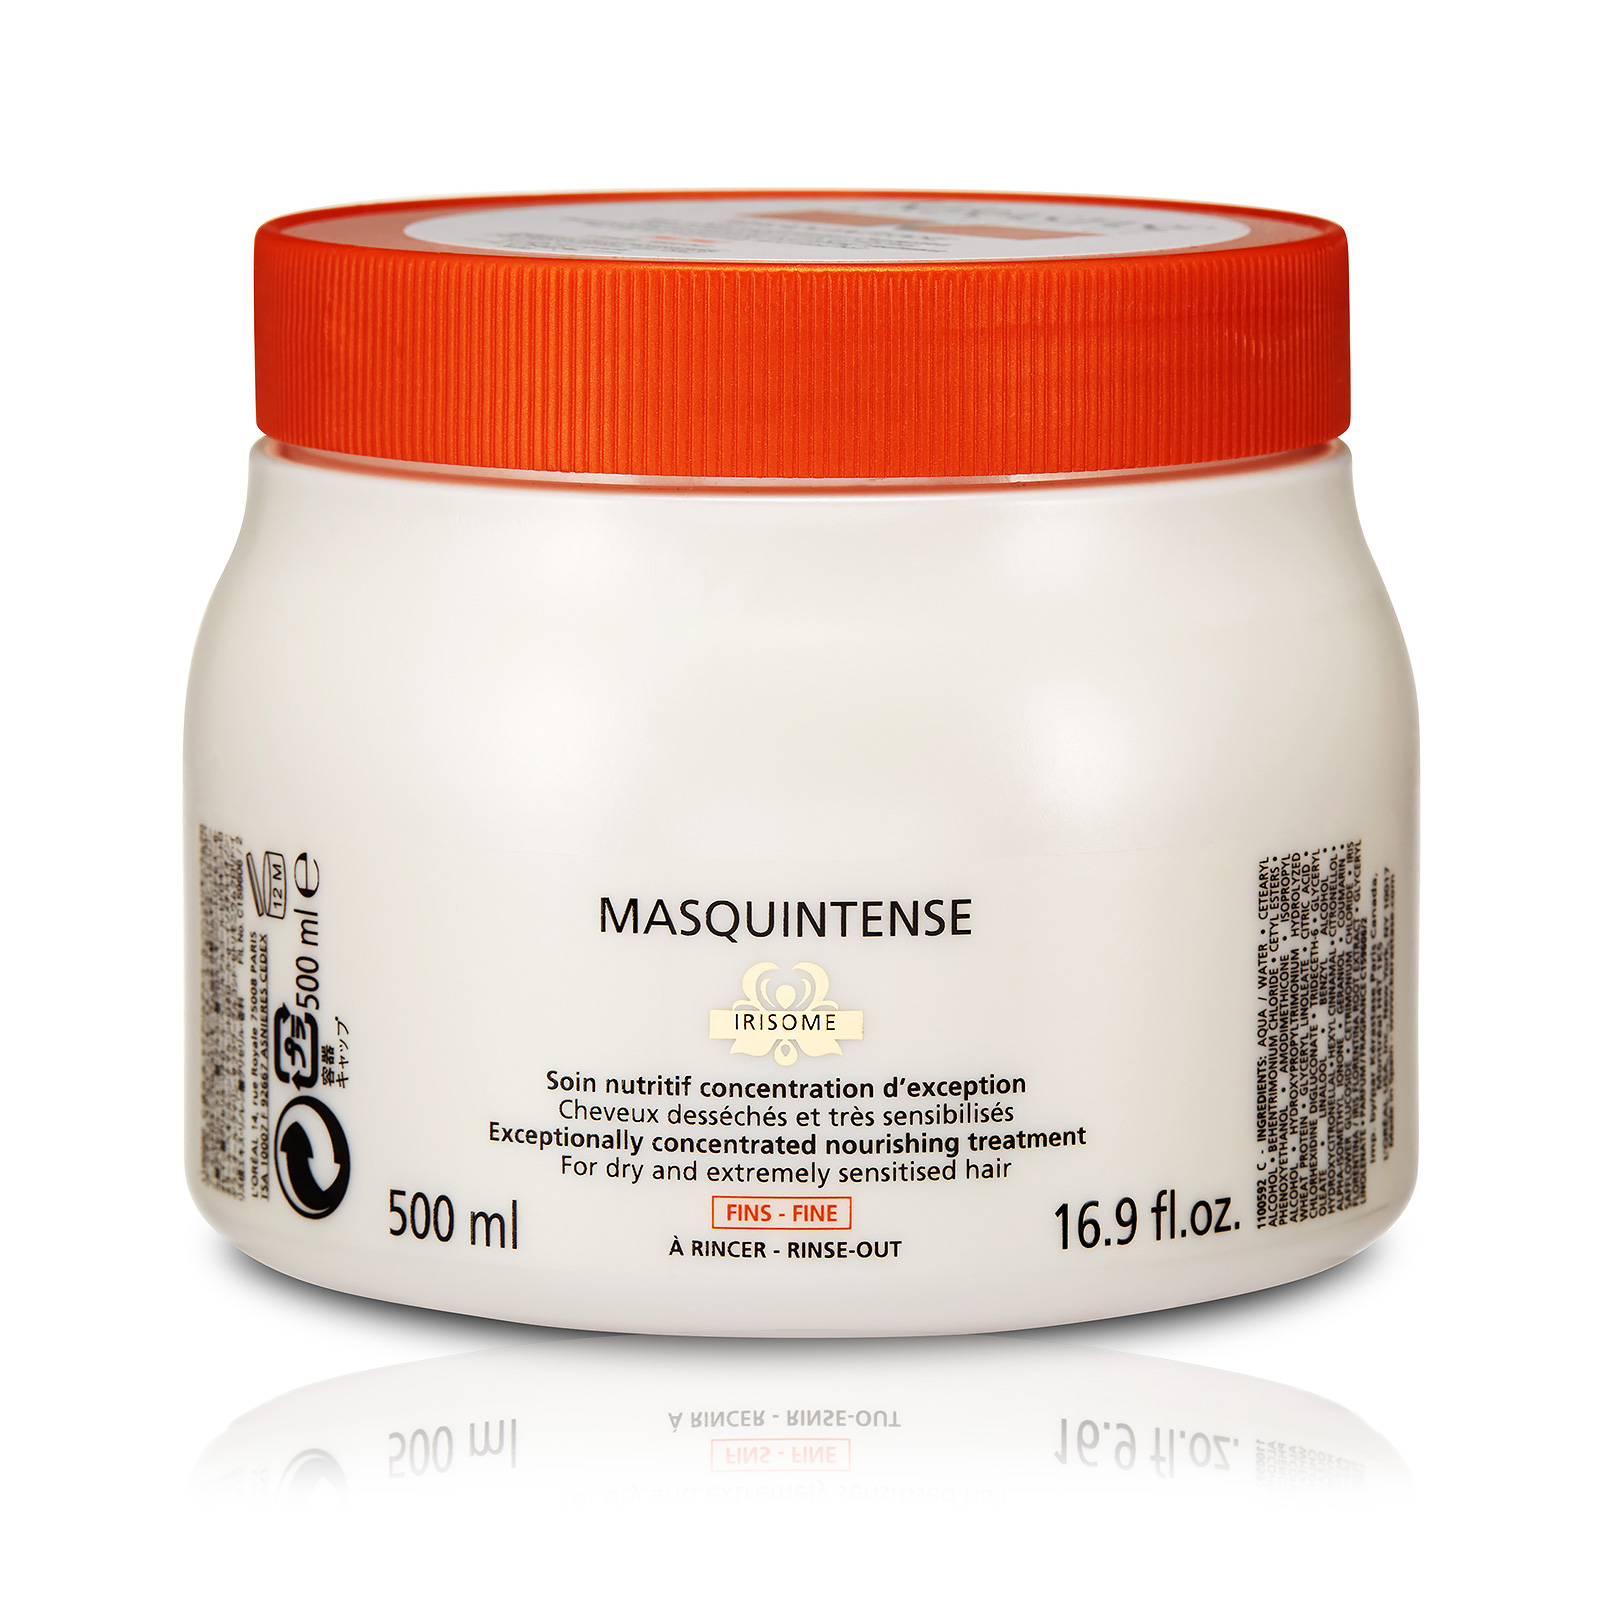 Paris Nutritive Masquintense Irisome Exceptionally Concentrated Treatment - Fine Hair (For Dry Extremely Sensitised Hair)500 ml 16.9 oz AKB Beauty